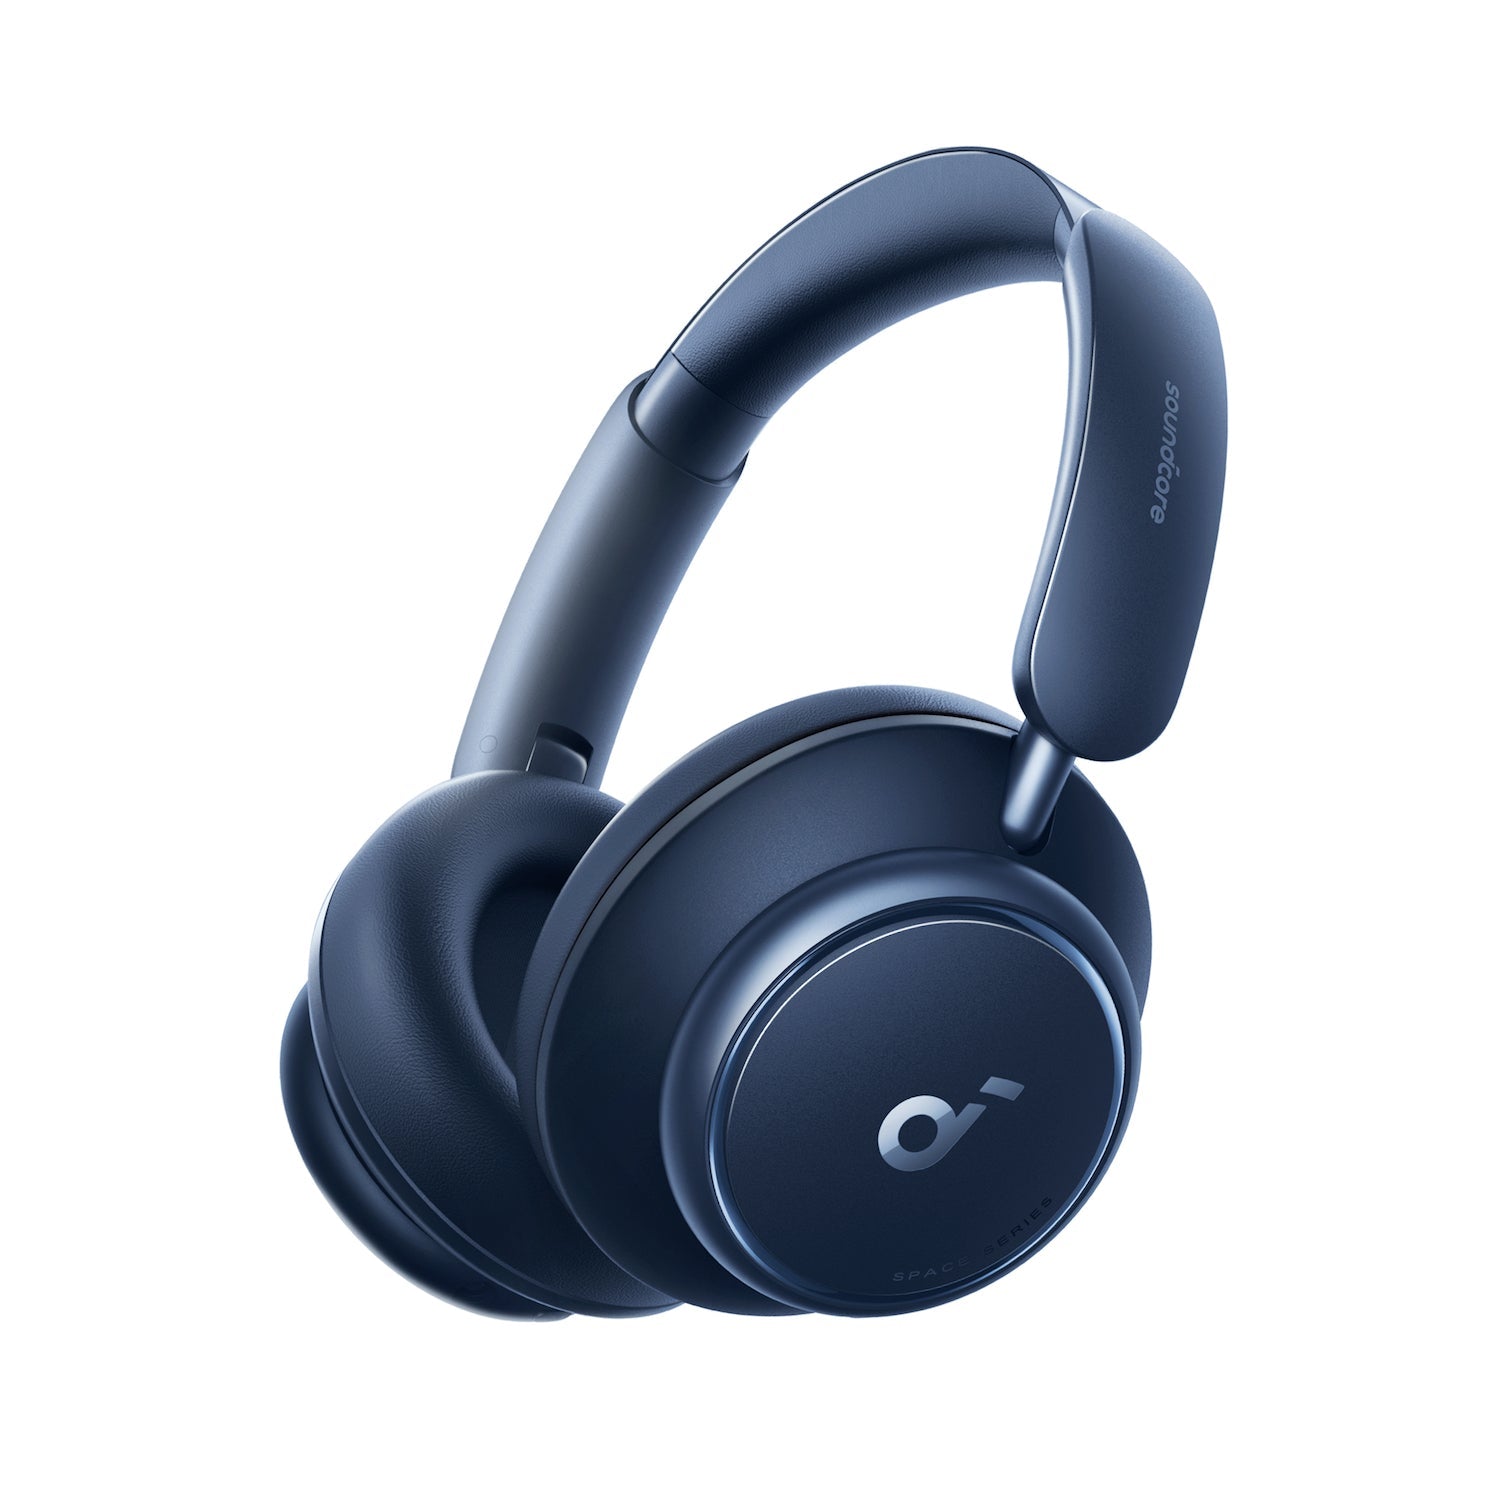 Buy Space Q45 All-New Noise Cancelling Headphones - soundcore 